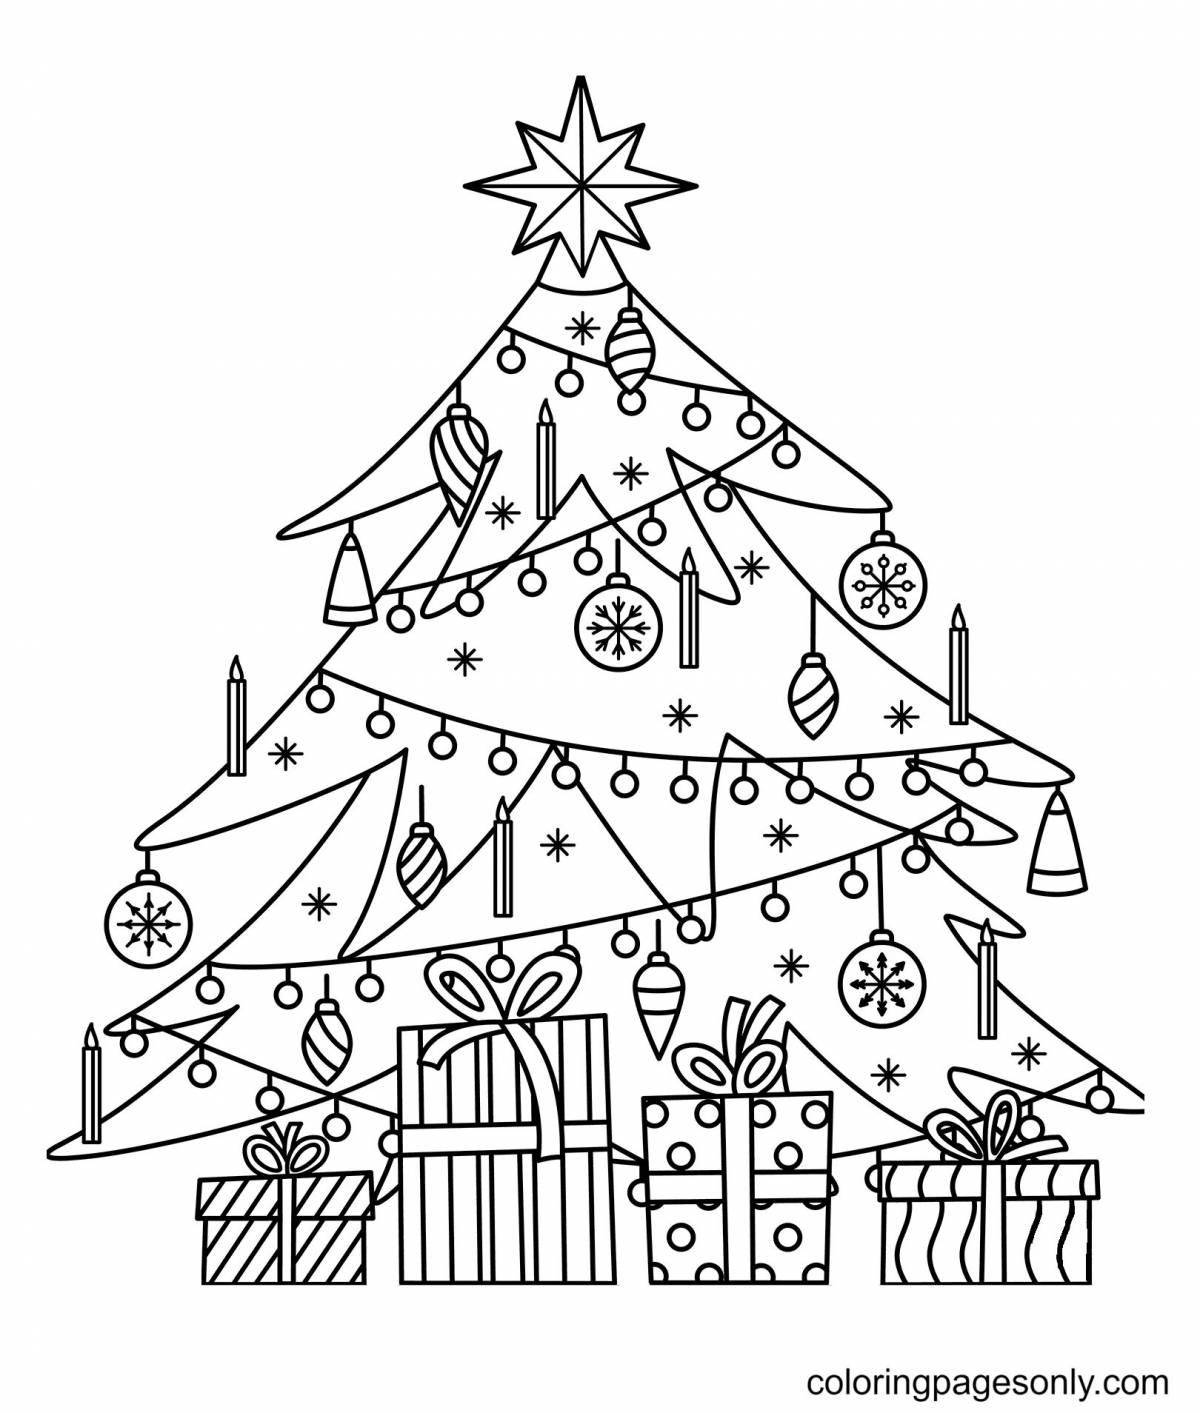 Coloring book joyful Christmas tree for children 6-7 years old